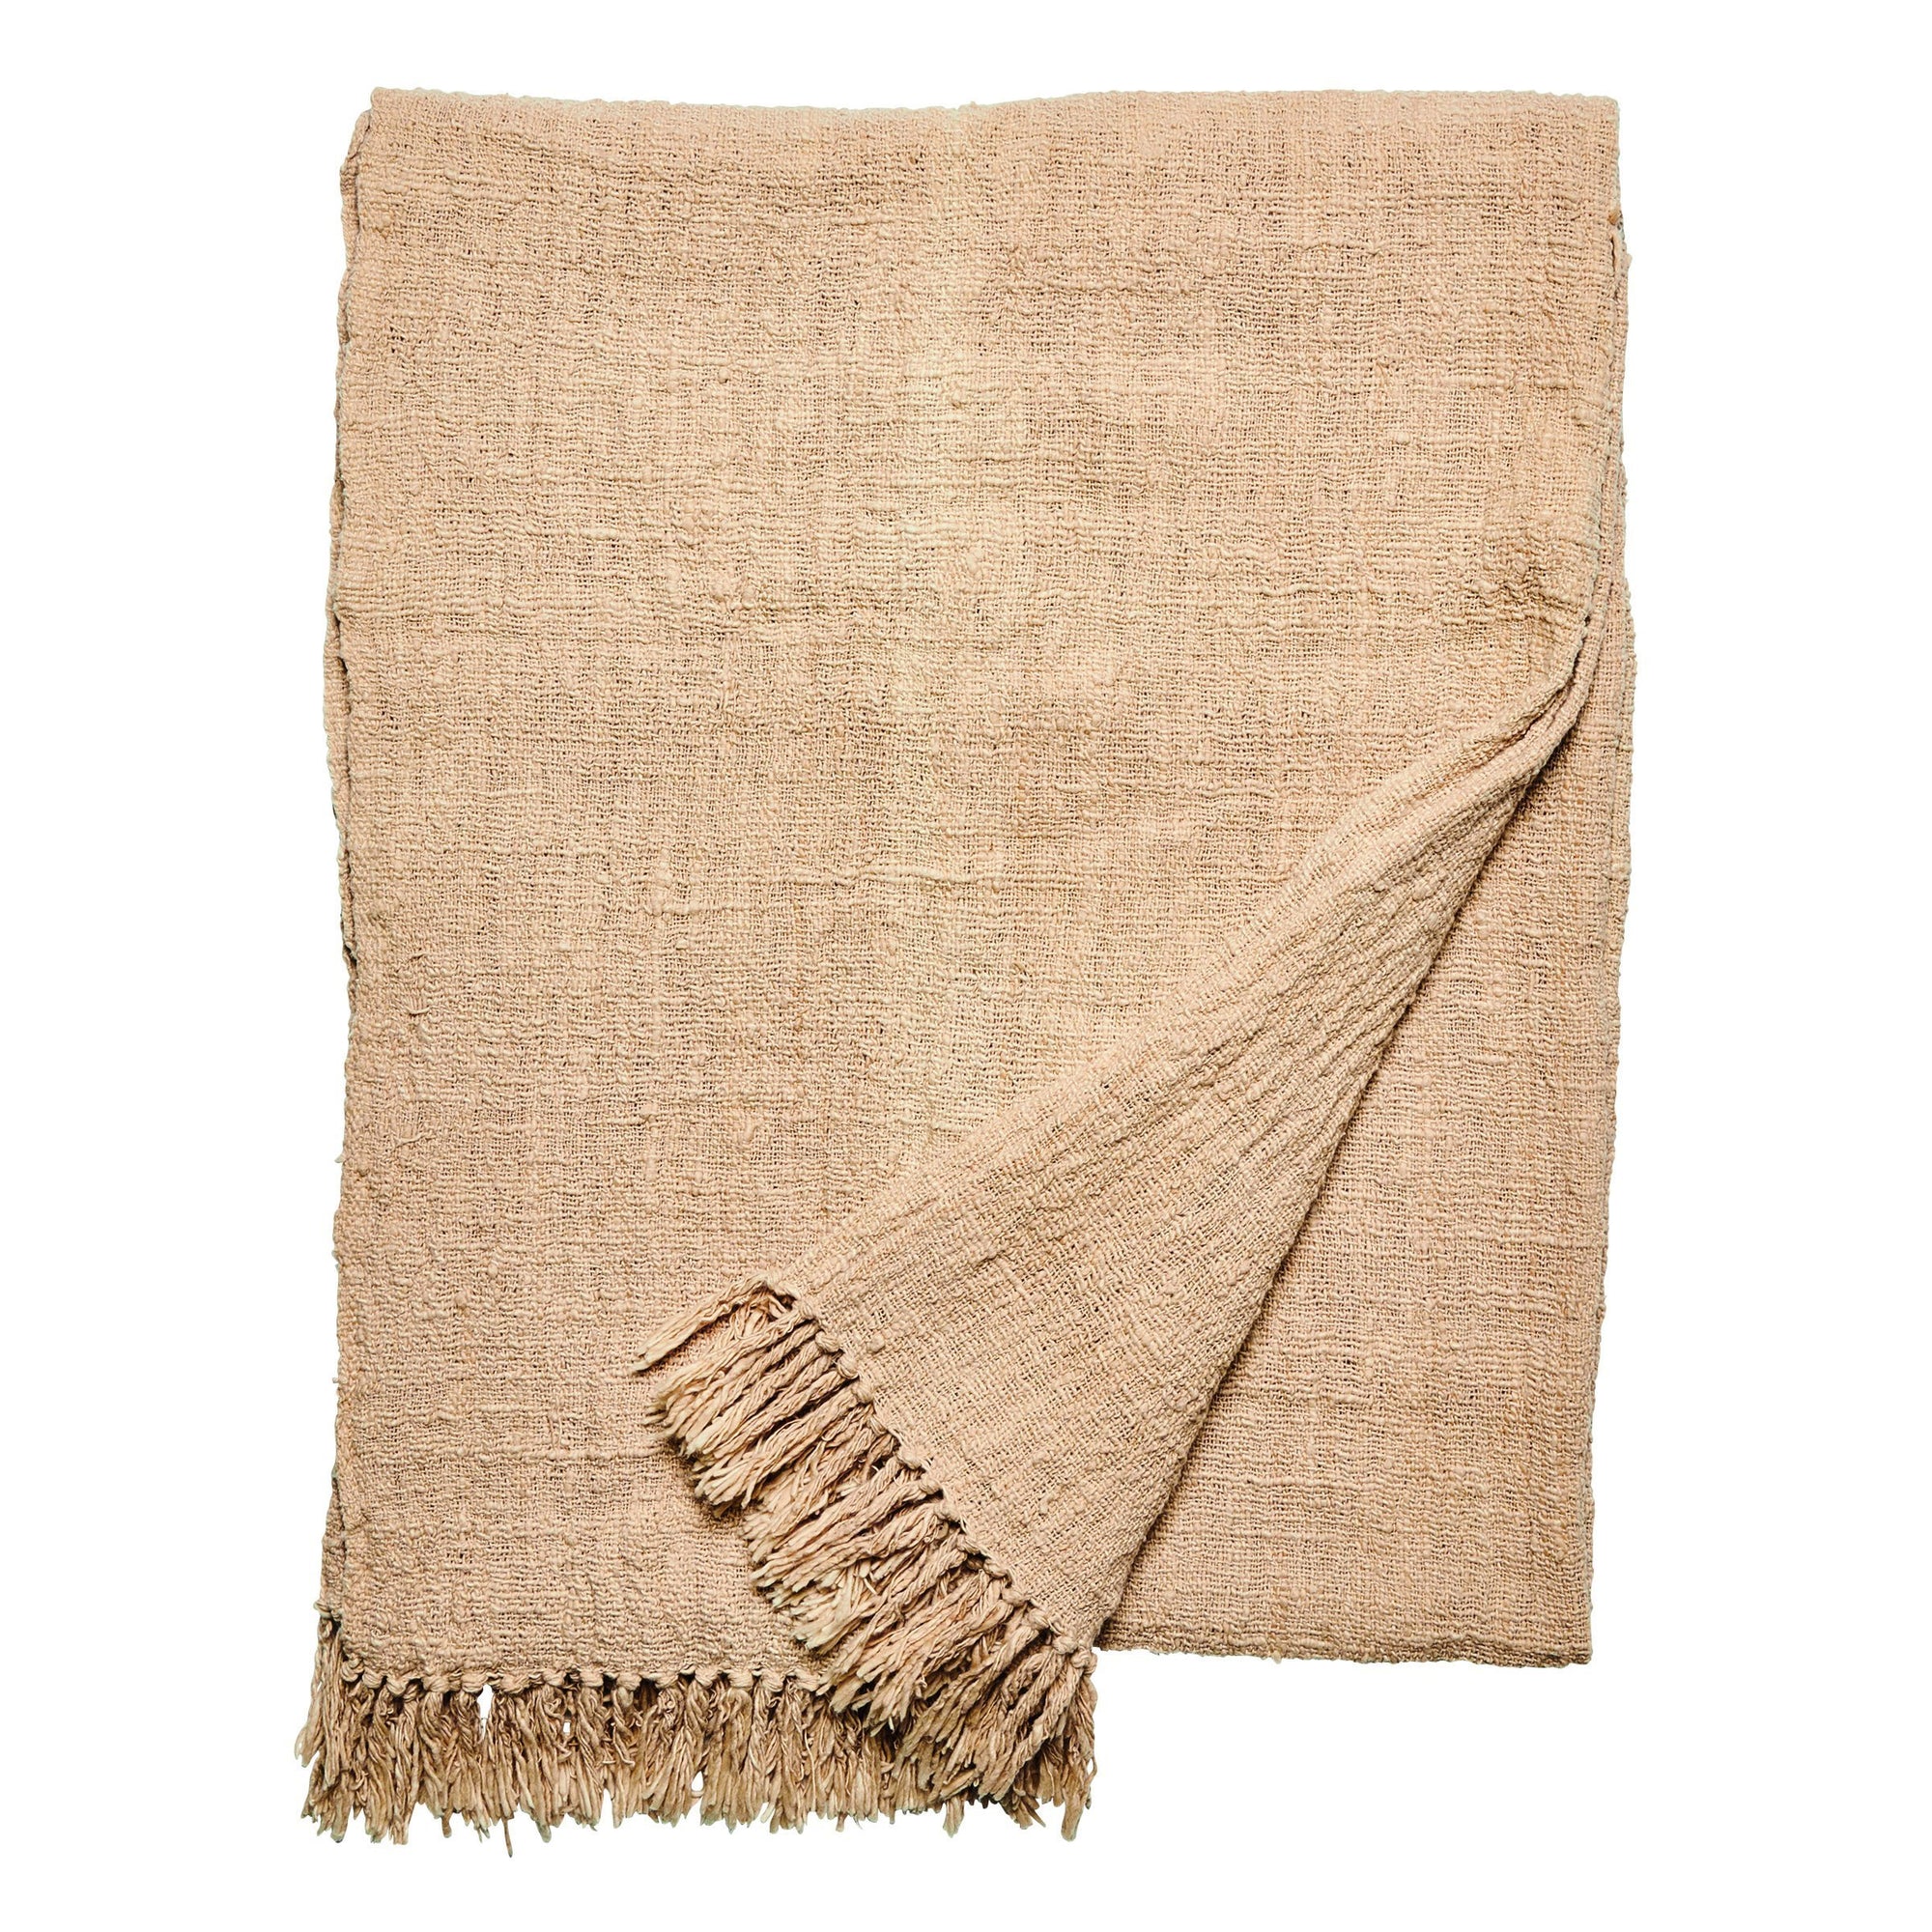 Plant dyed cotton throw (BSH1090)